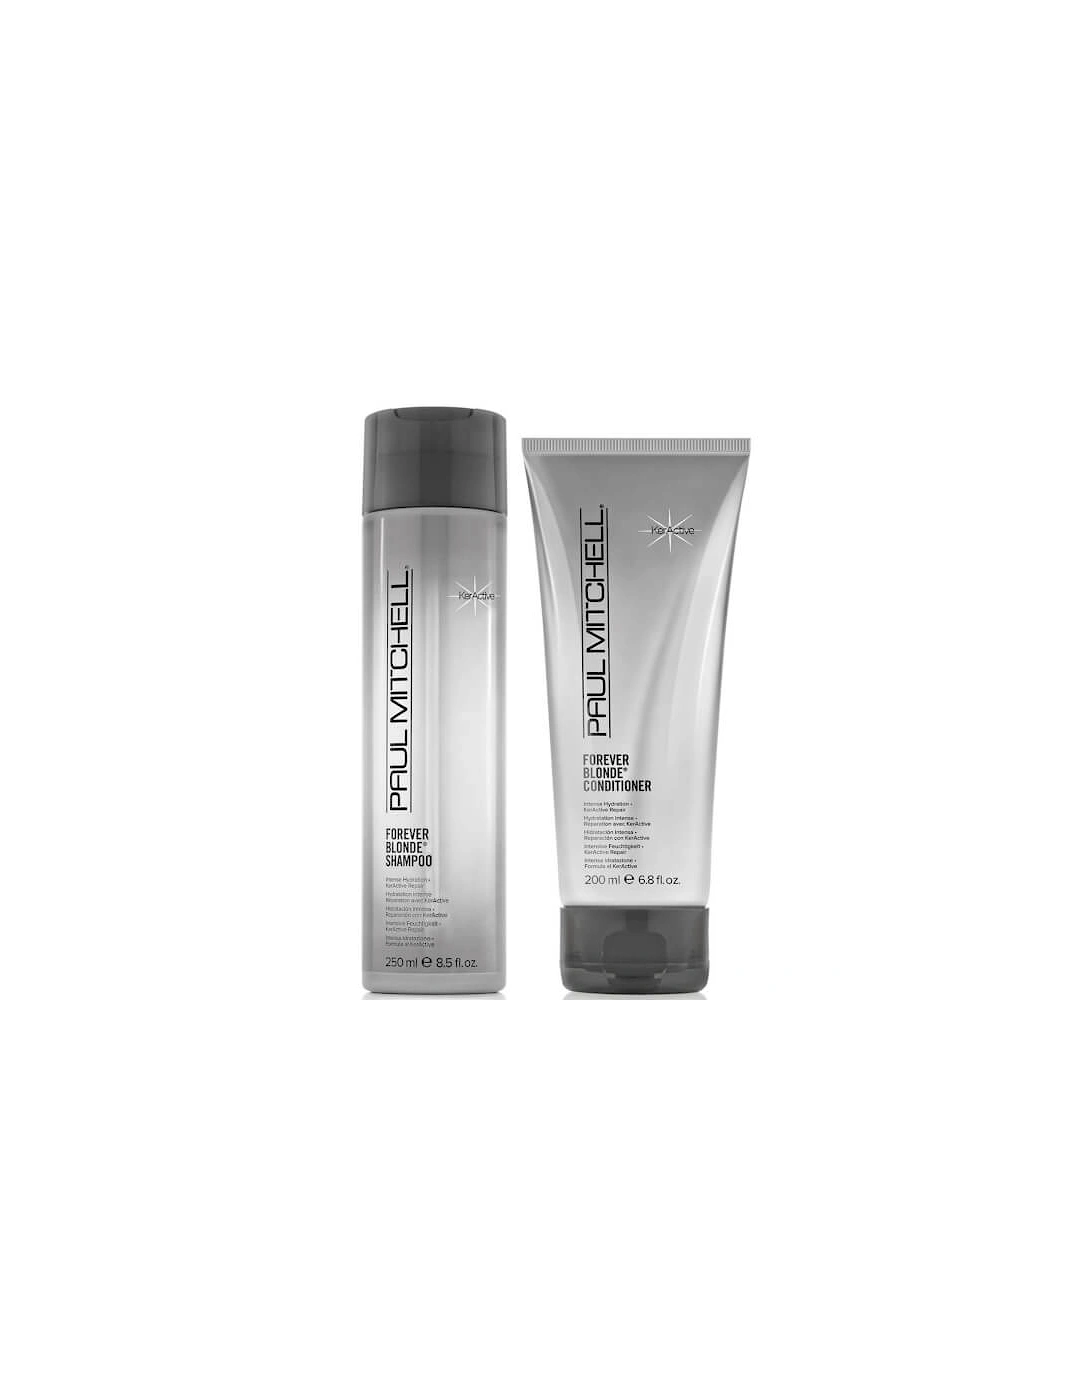 Forever Blonde Shampoo and Conditioner, 2 of 1